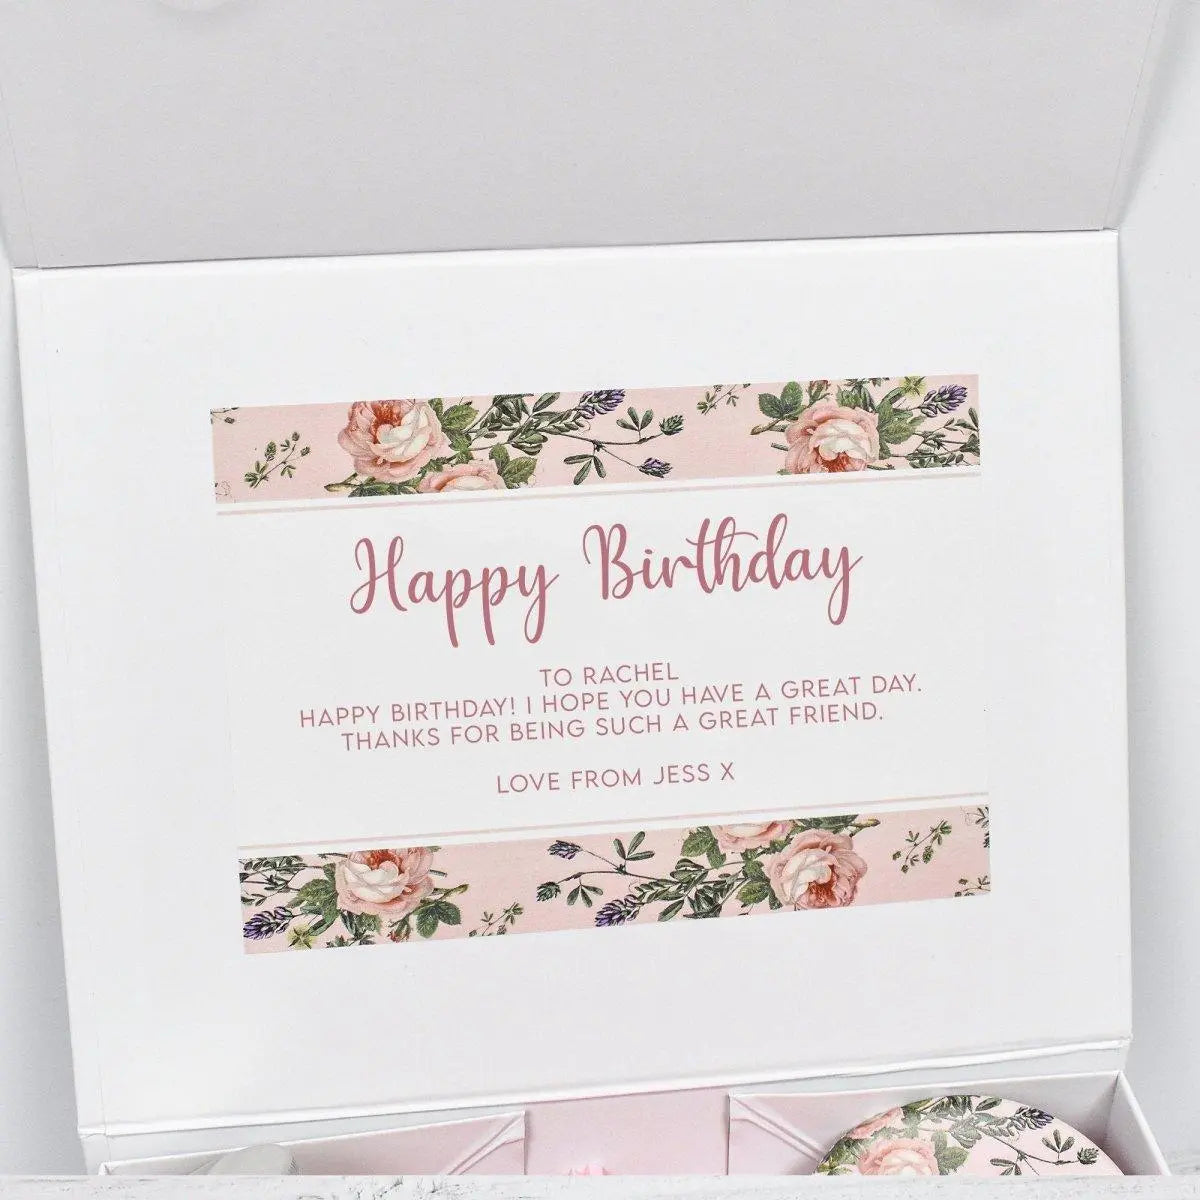 Happy Birthday Gift Box Filled, Rose Gold Best Friend Gift Box, Beauty Filled Gift Boxes, Spa Kits Box, Happy Birthday Gift, Boxed Gifts, - Amy Lucy